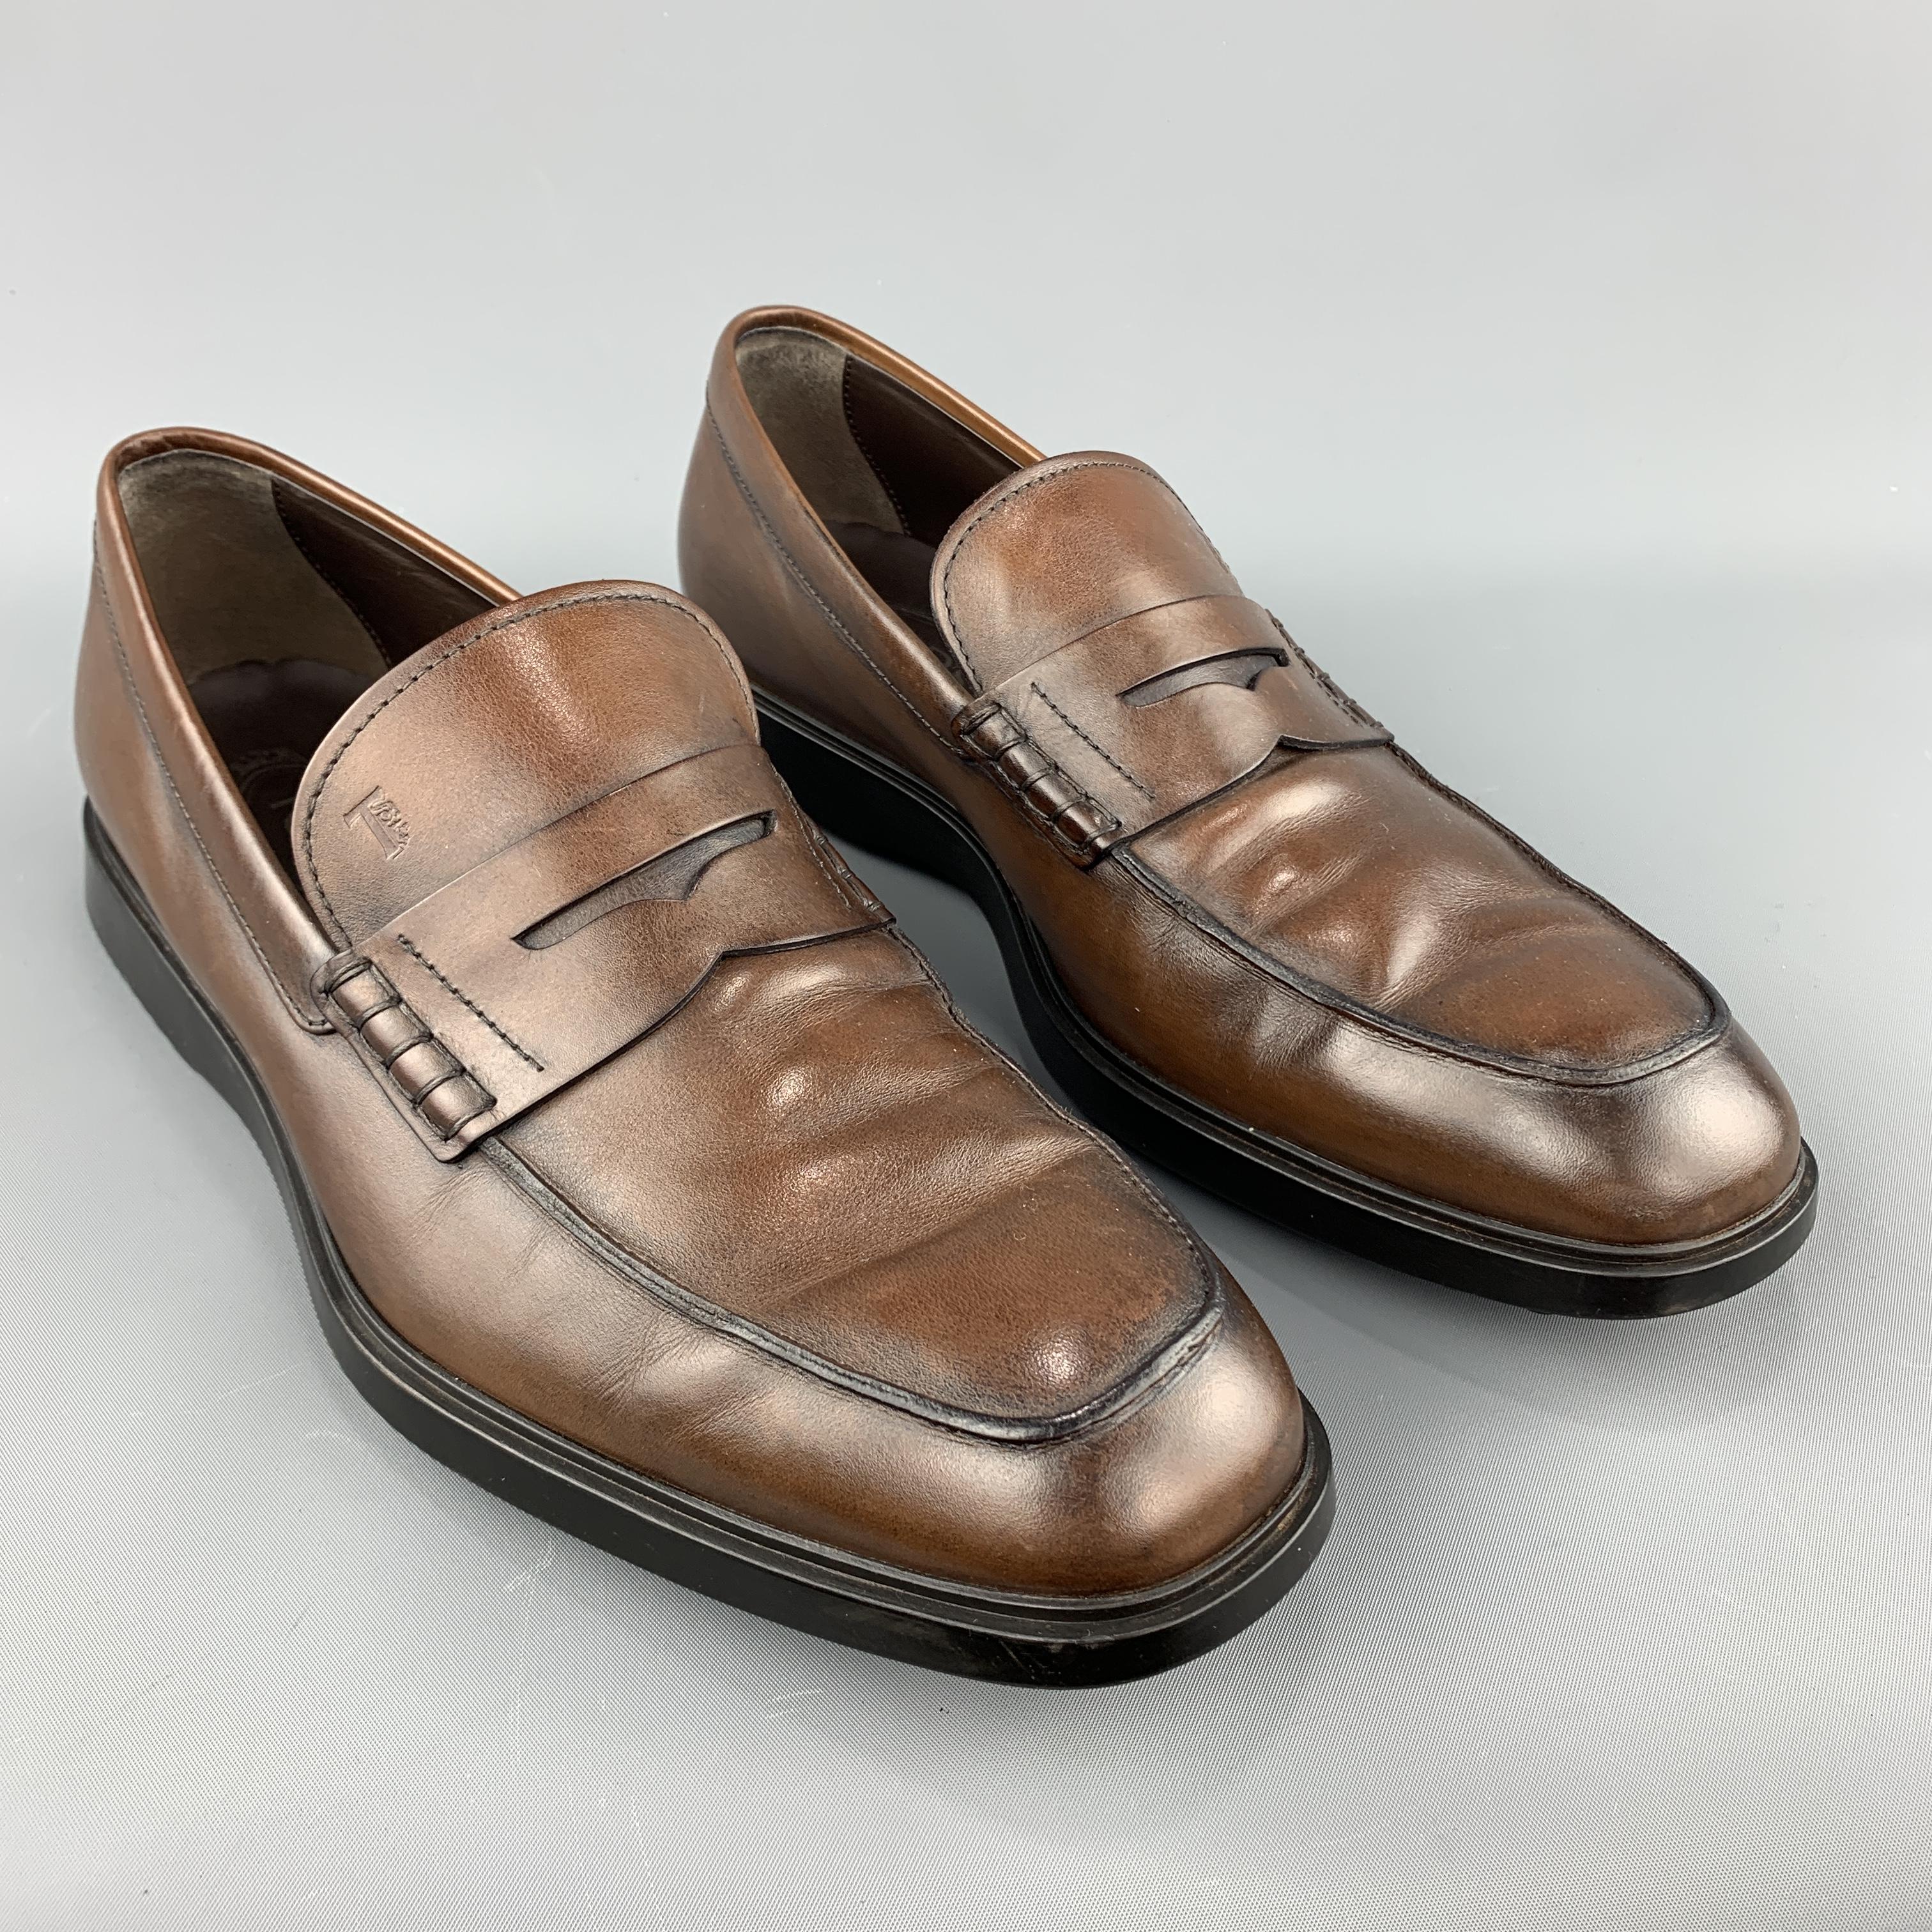 TOD'S penny loafers come in brown leather with a rubber sole. Made in Italy.
 
Excellent Pre-Owned Condition.
Marked: UK 9
 
Outsole: 12.25 x 4.5 in.